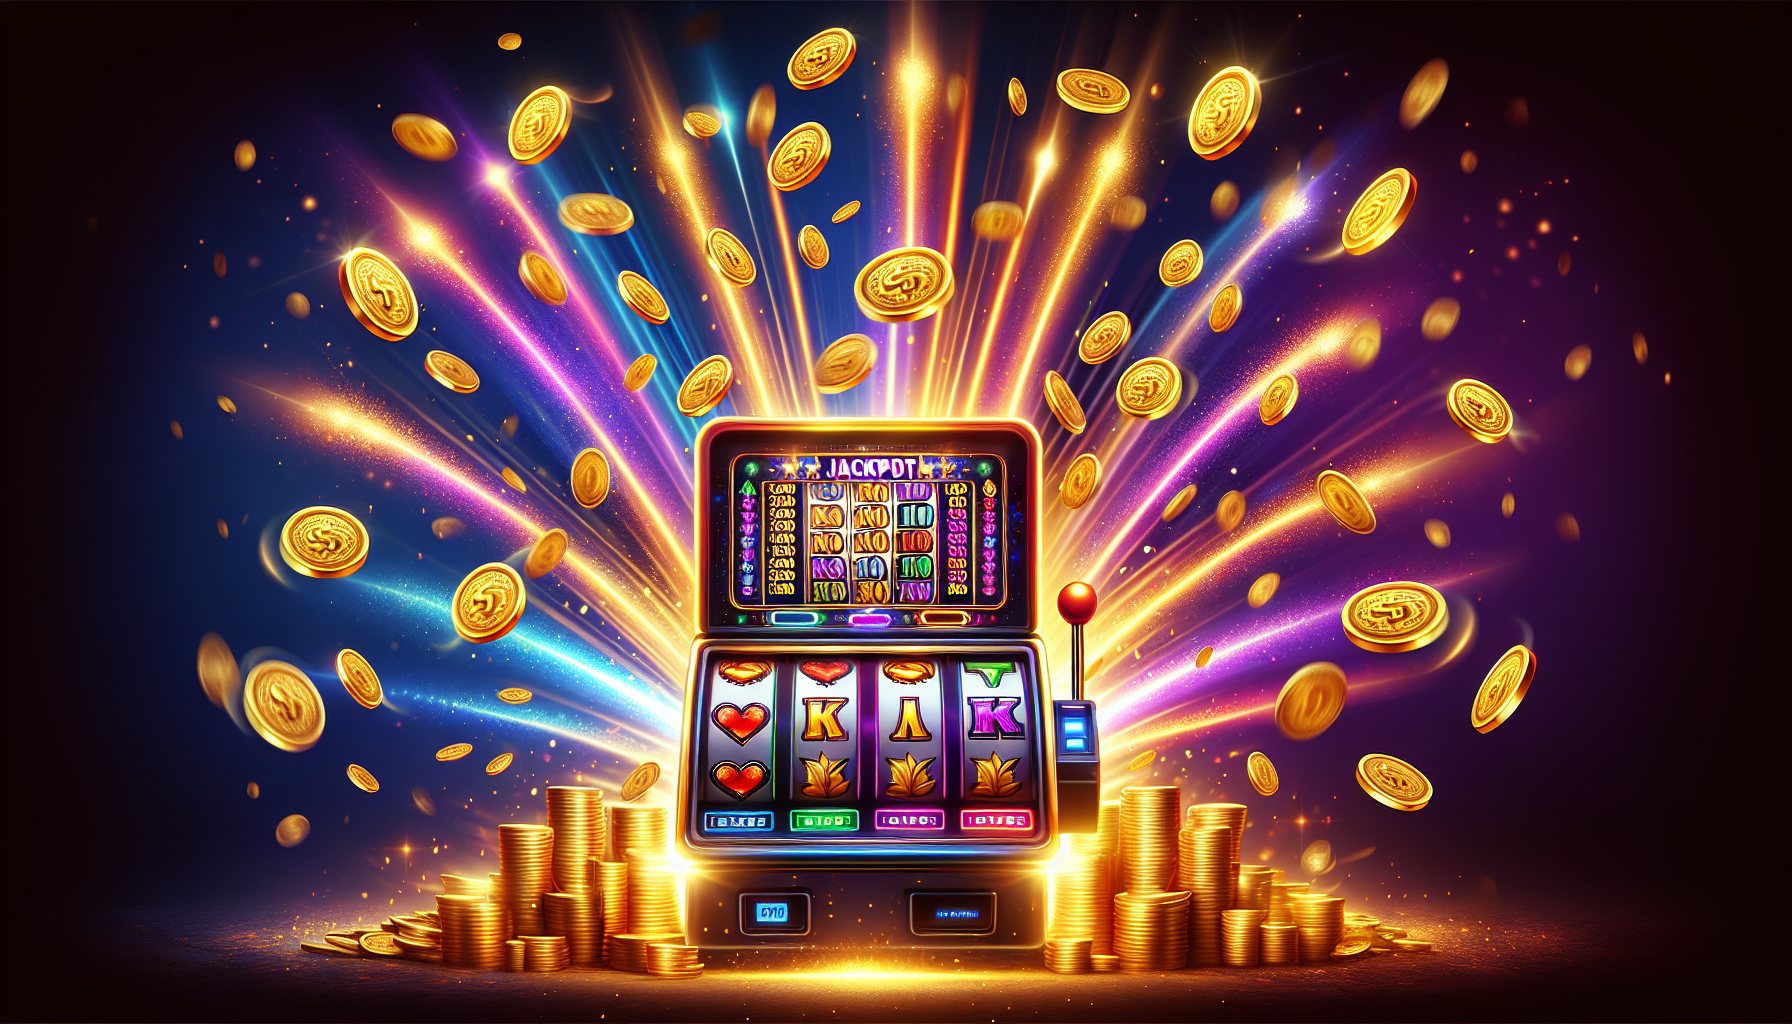 Does Anyone Win Money On Online Slots?